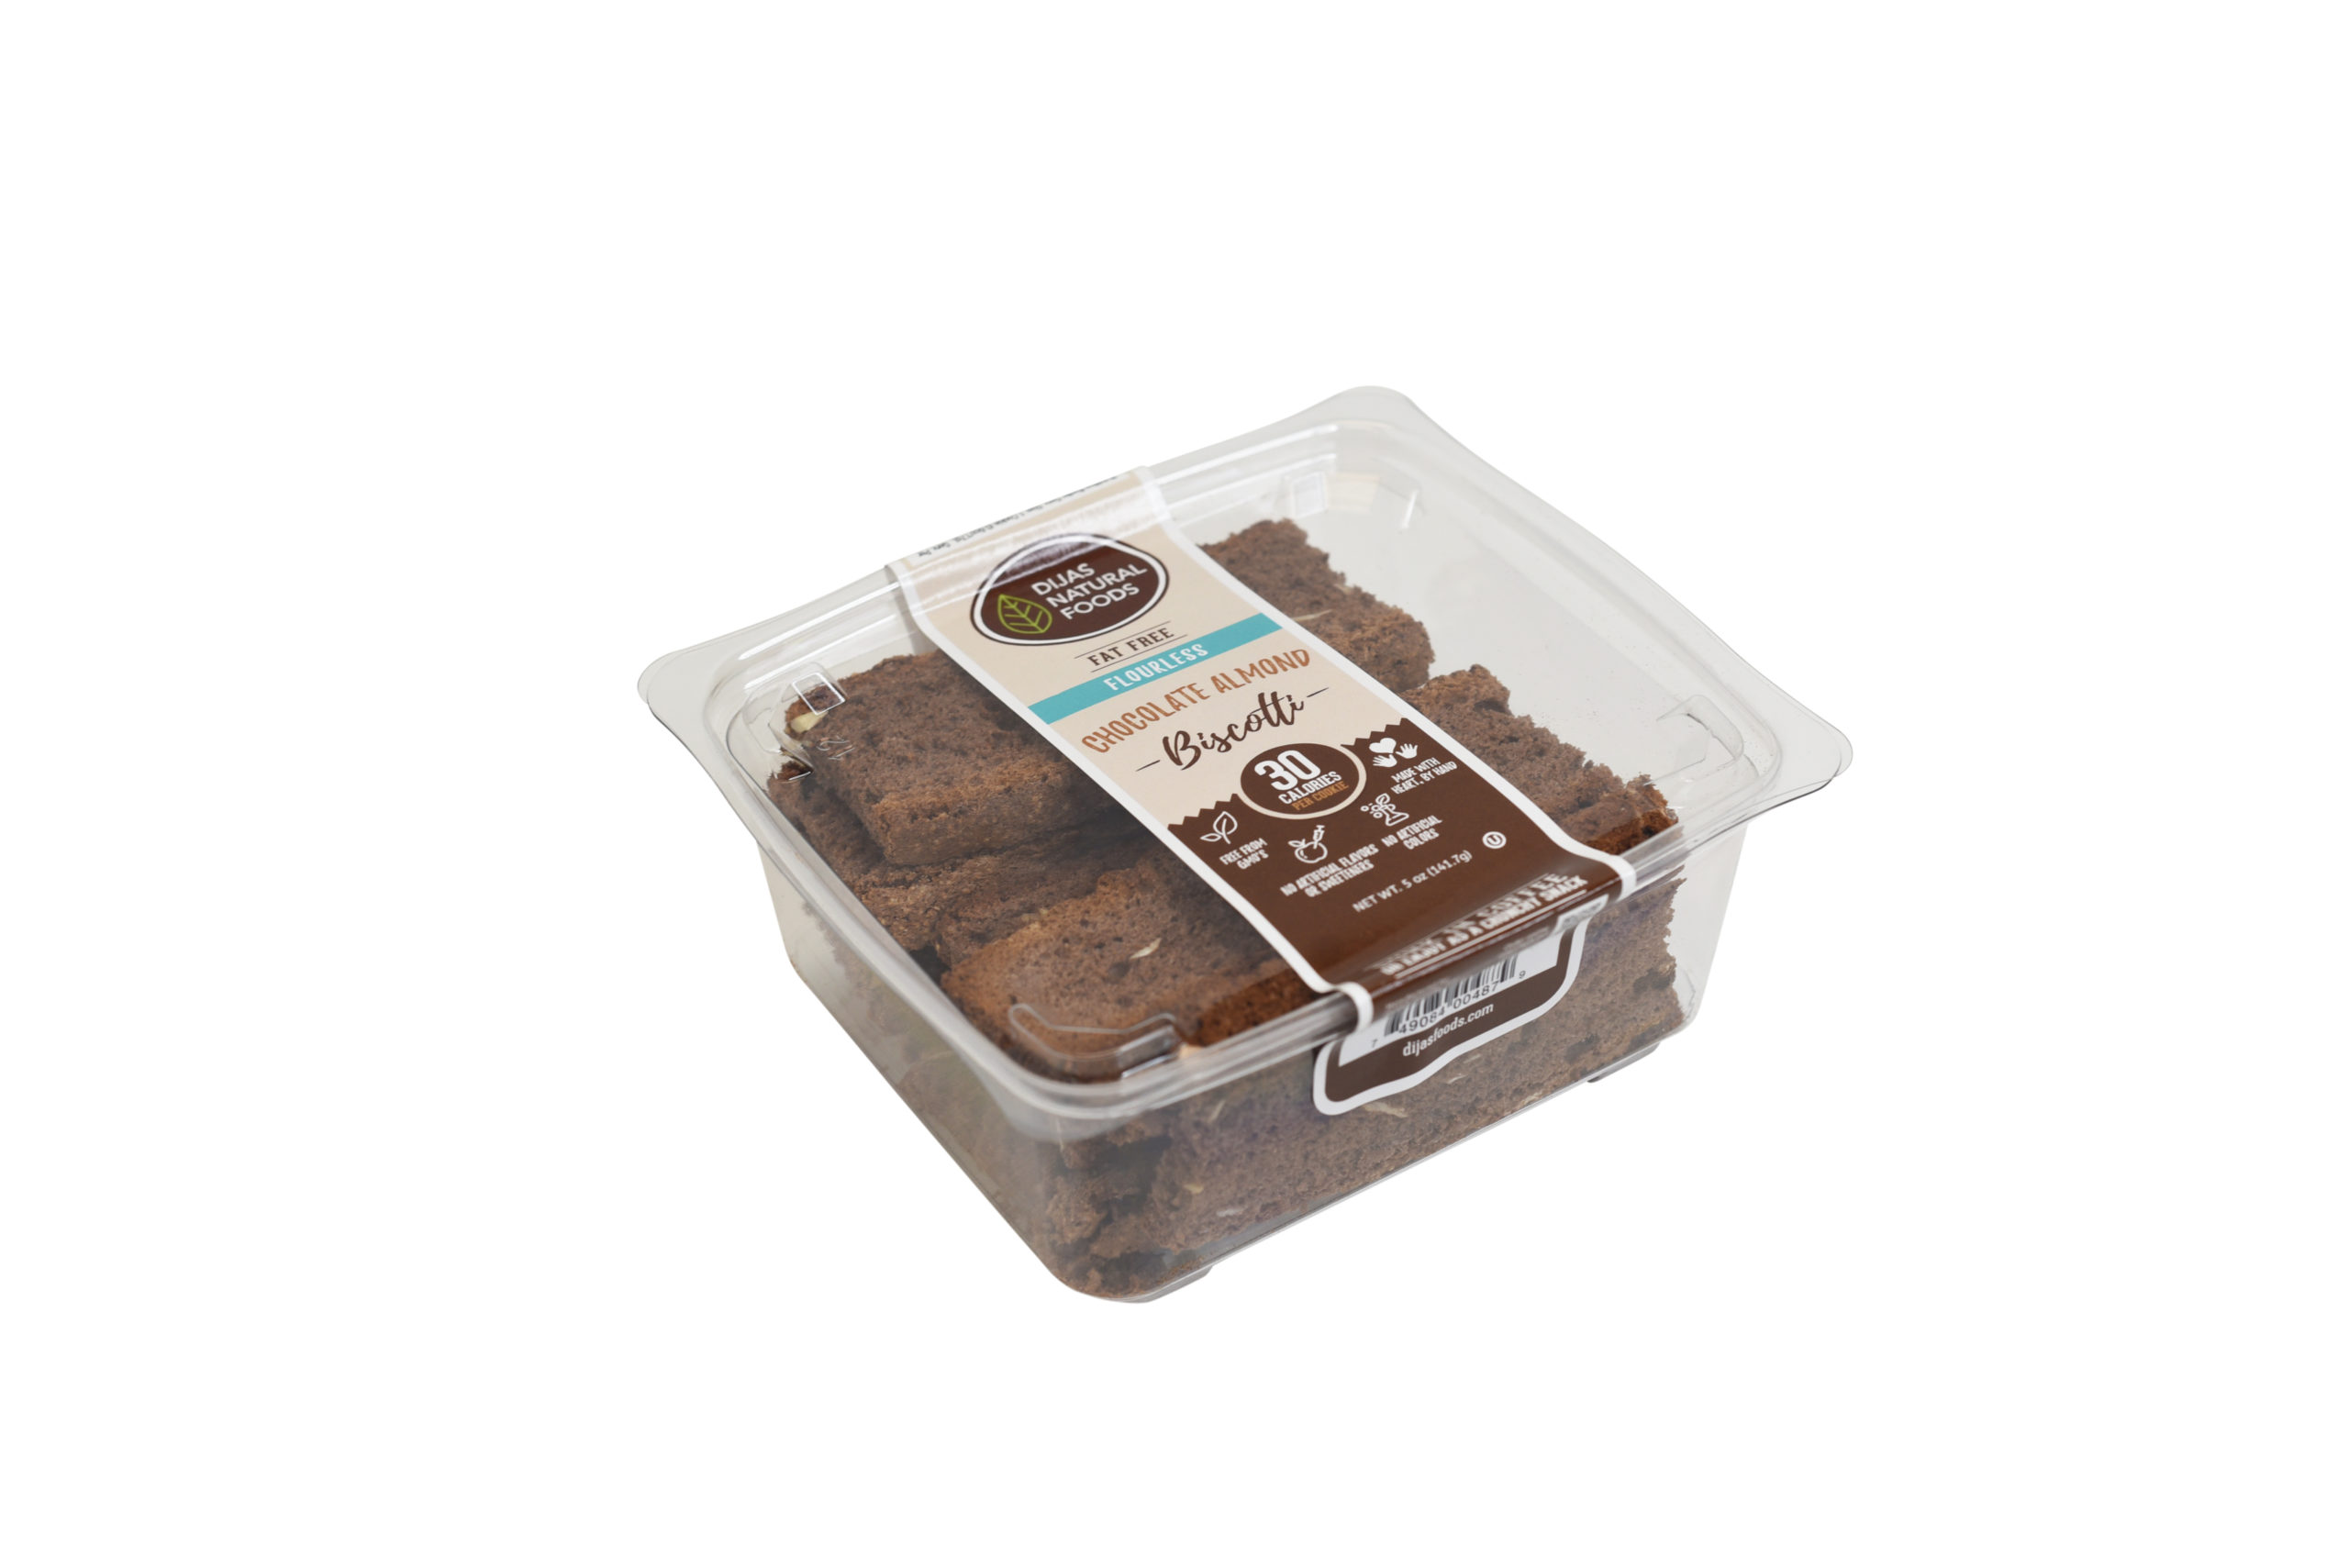 DIJAS Flourless Chocolate Almond Biscotti is a delicious healthy treat! We ship to all of the lower 48 states including California, Washington, Texas, Colorado, New York, Pennsylvania, New Jersey, and Florida!